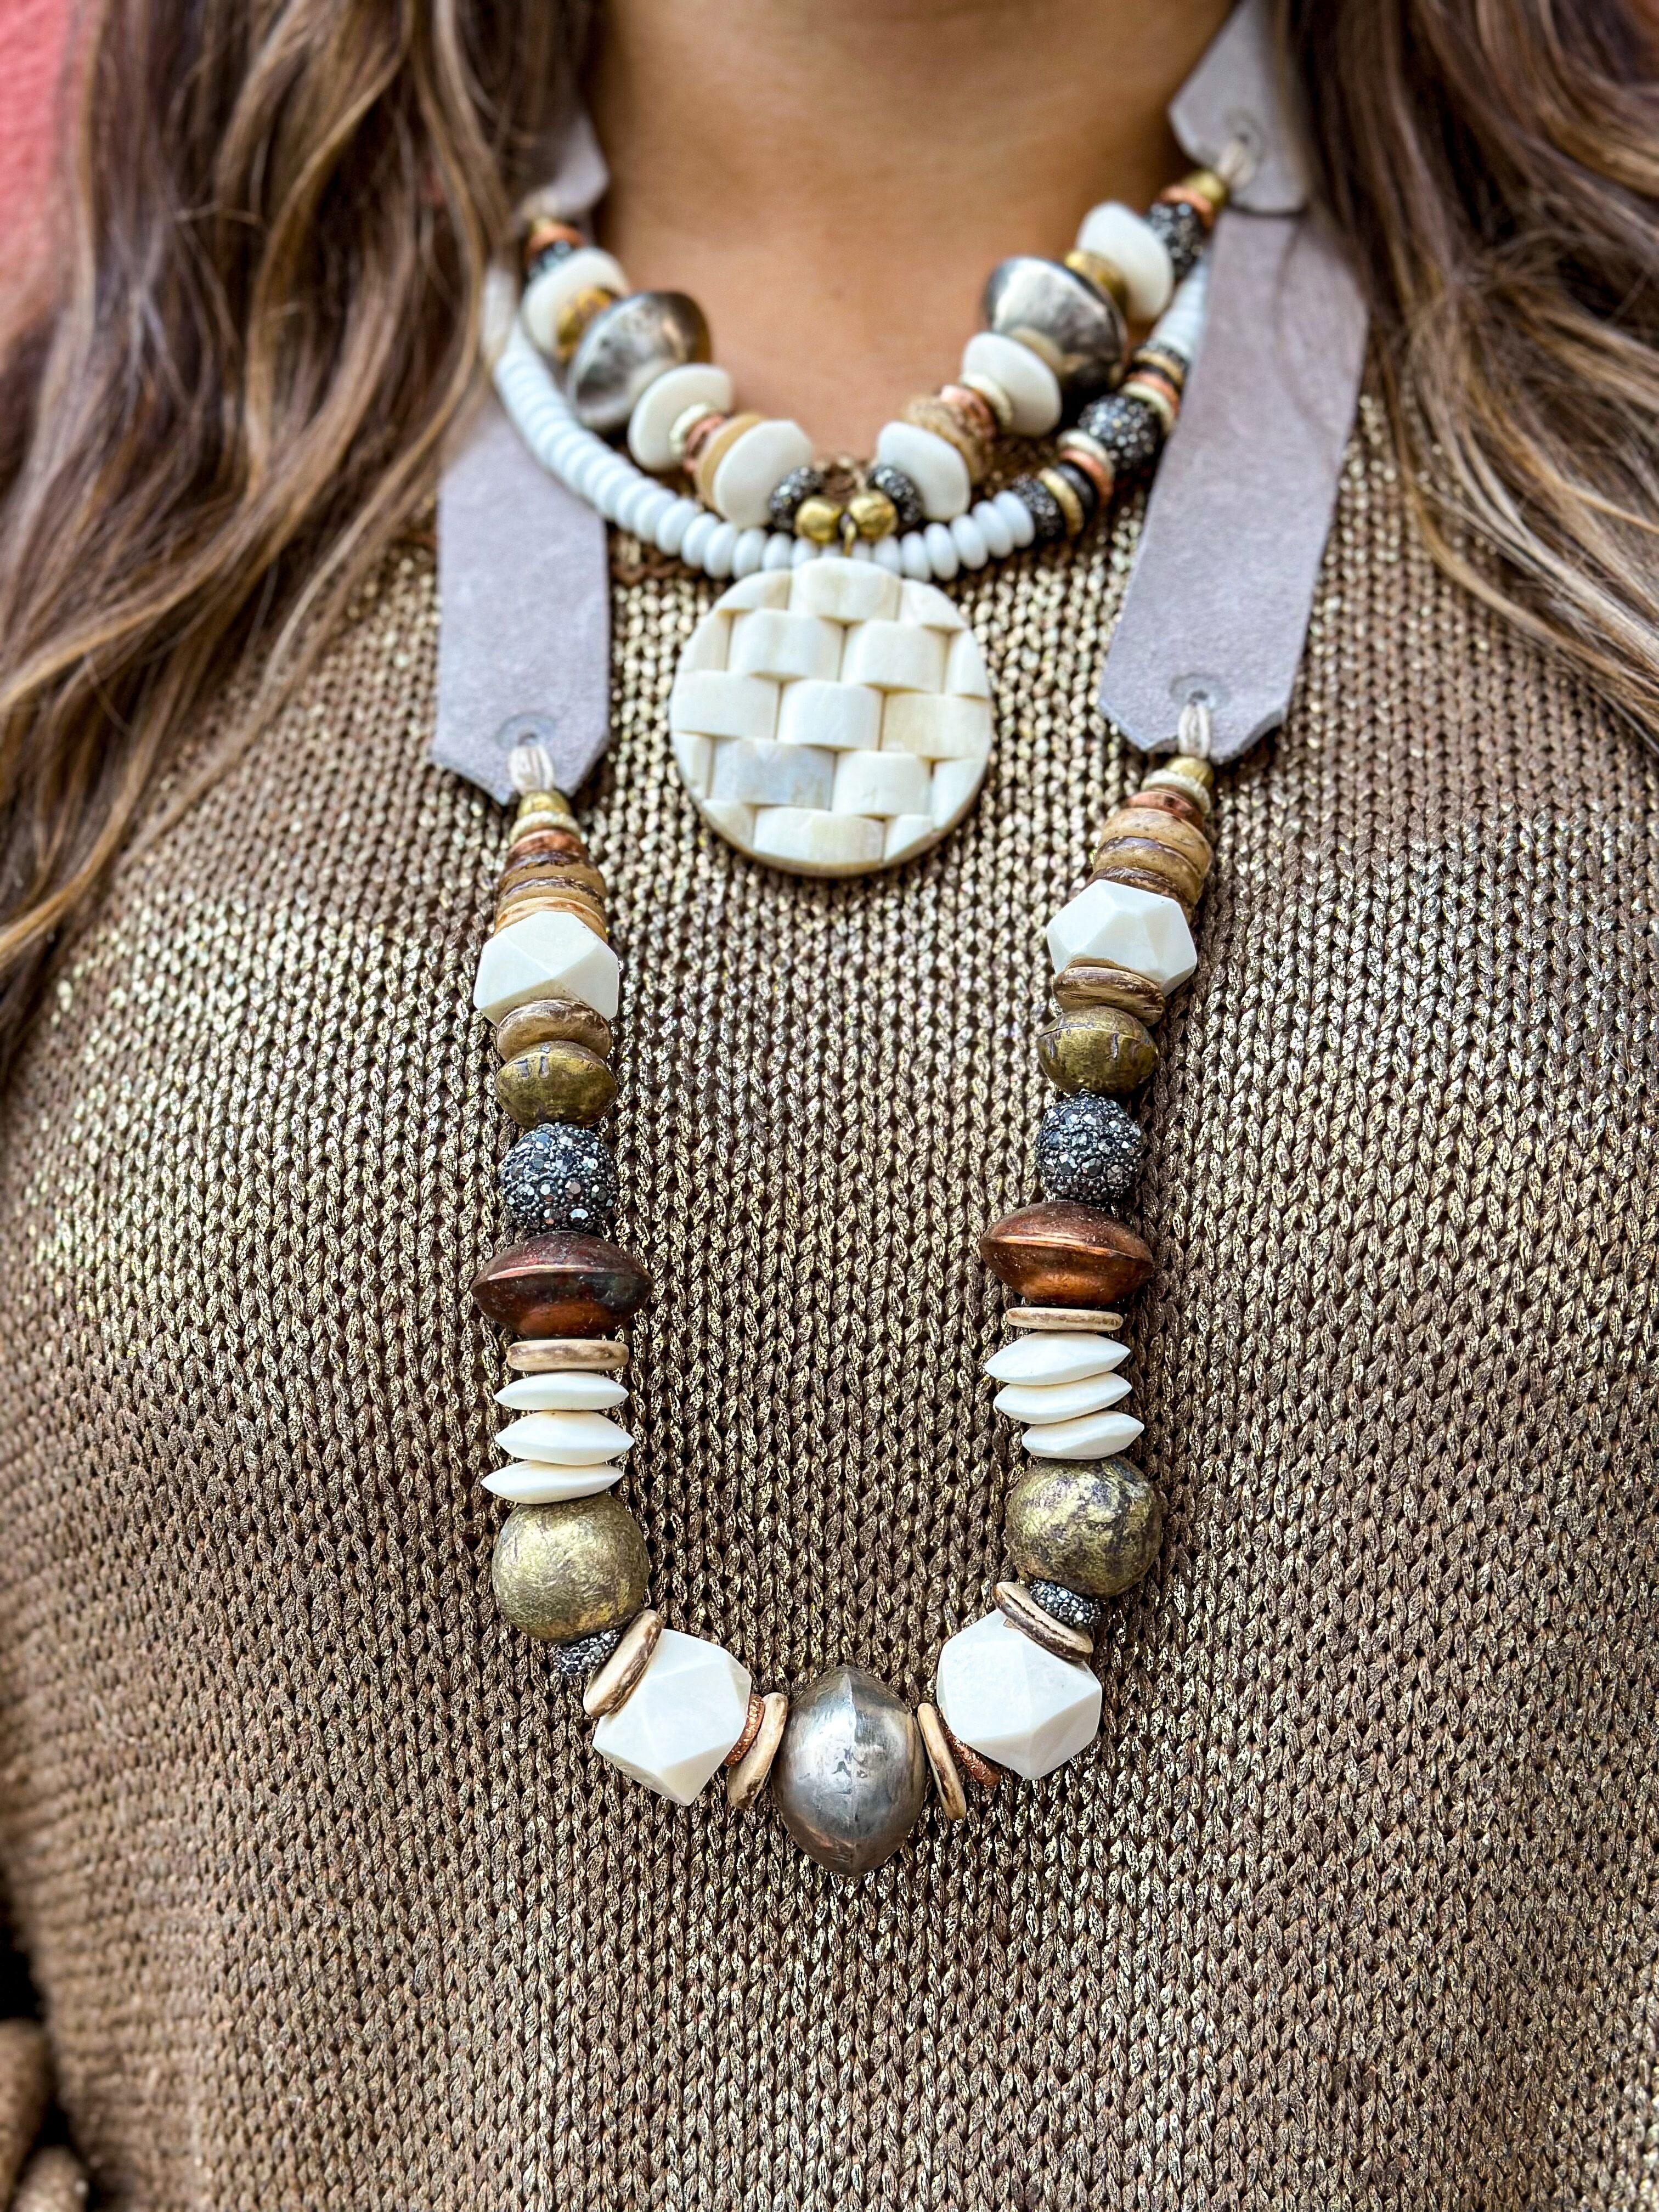 Mid Classic Necklace | Golden Hour